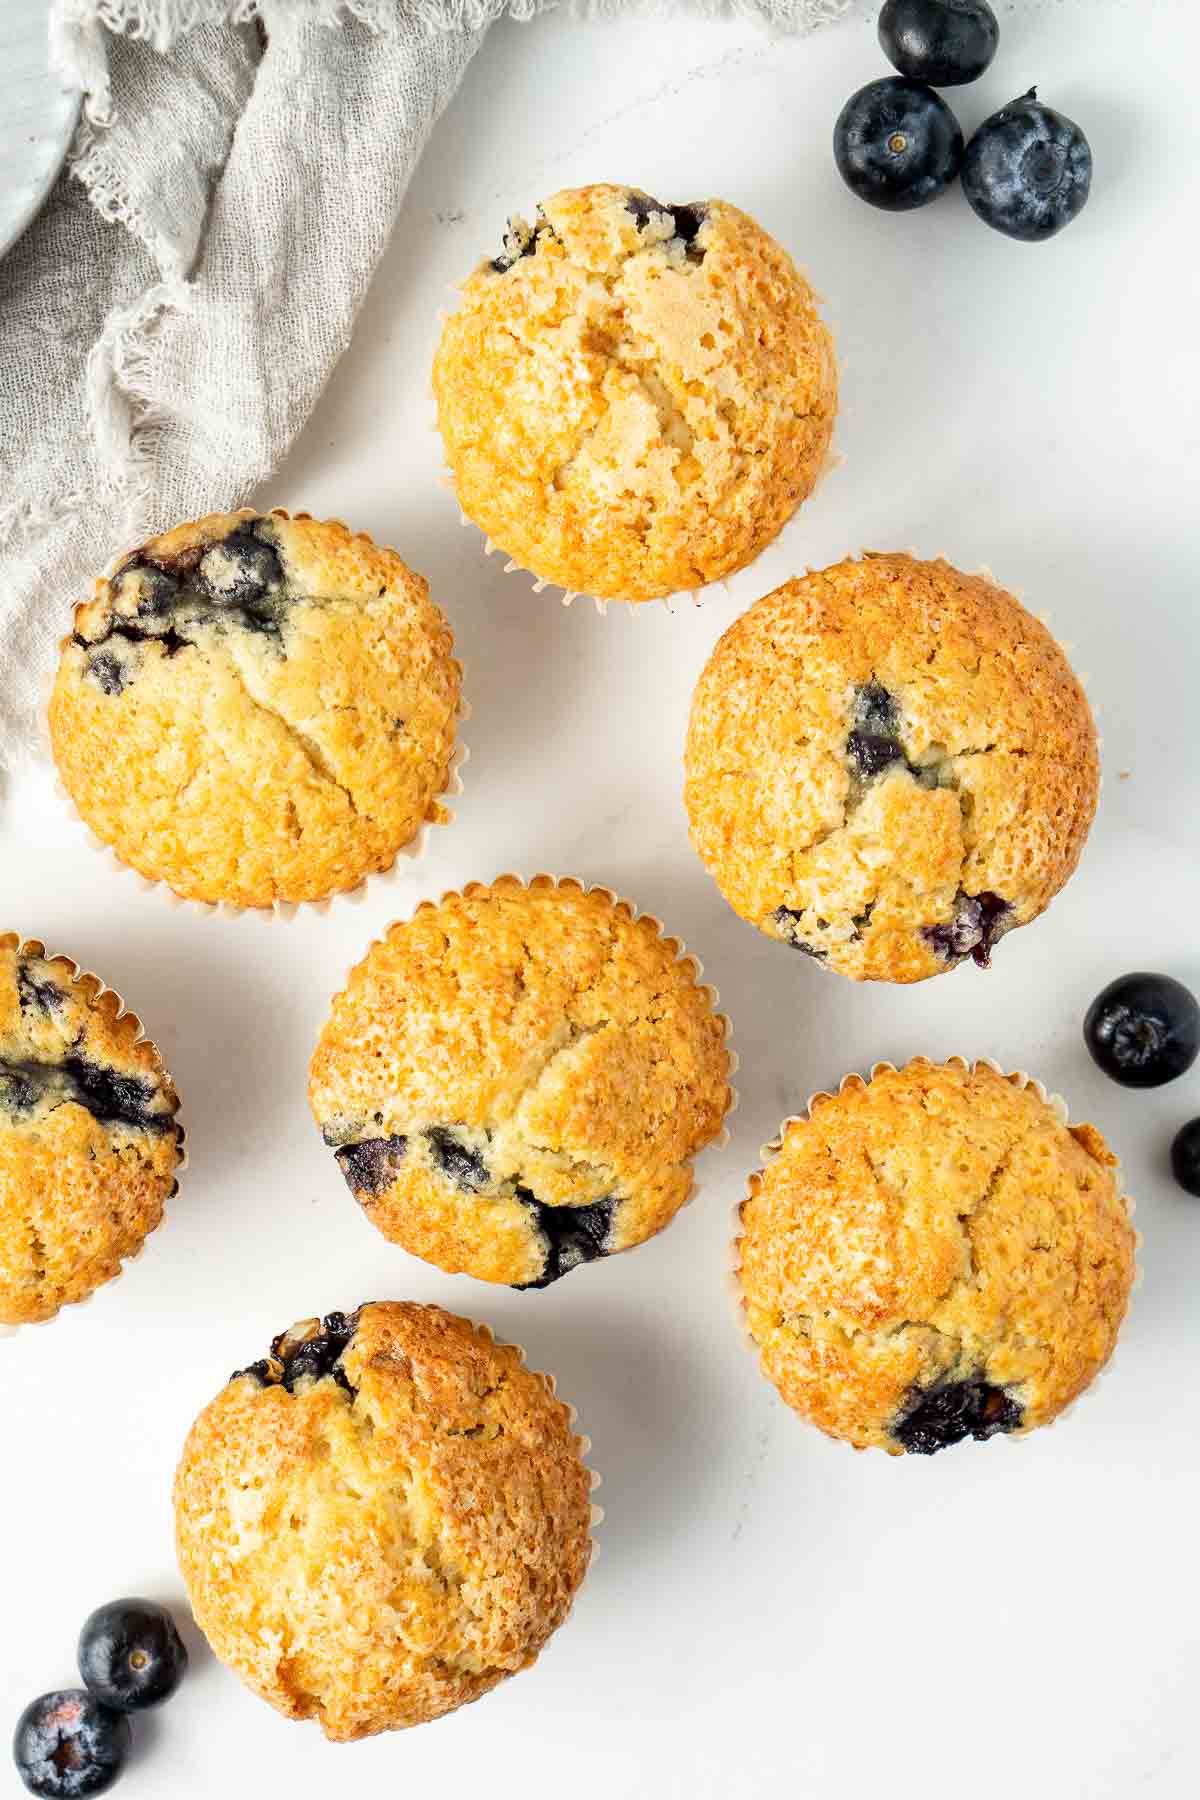 Blueberry muffins on a white table from above.